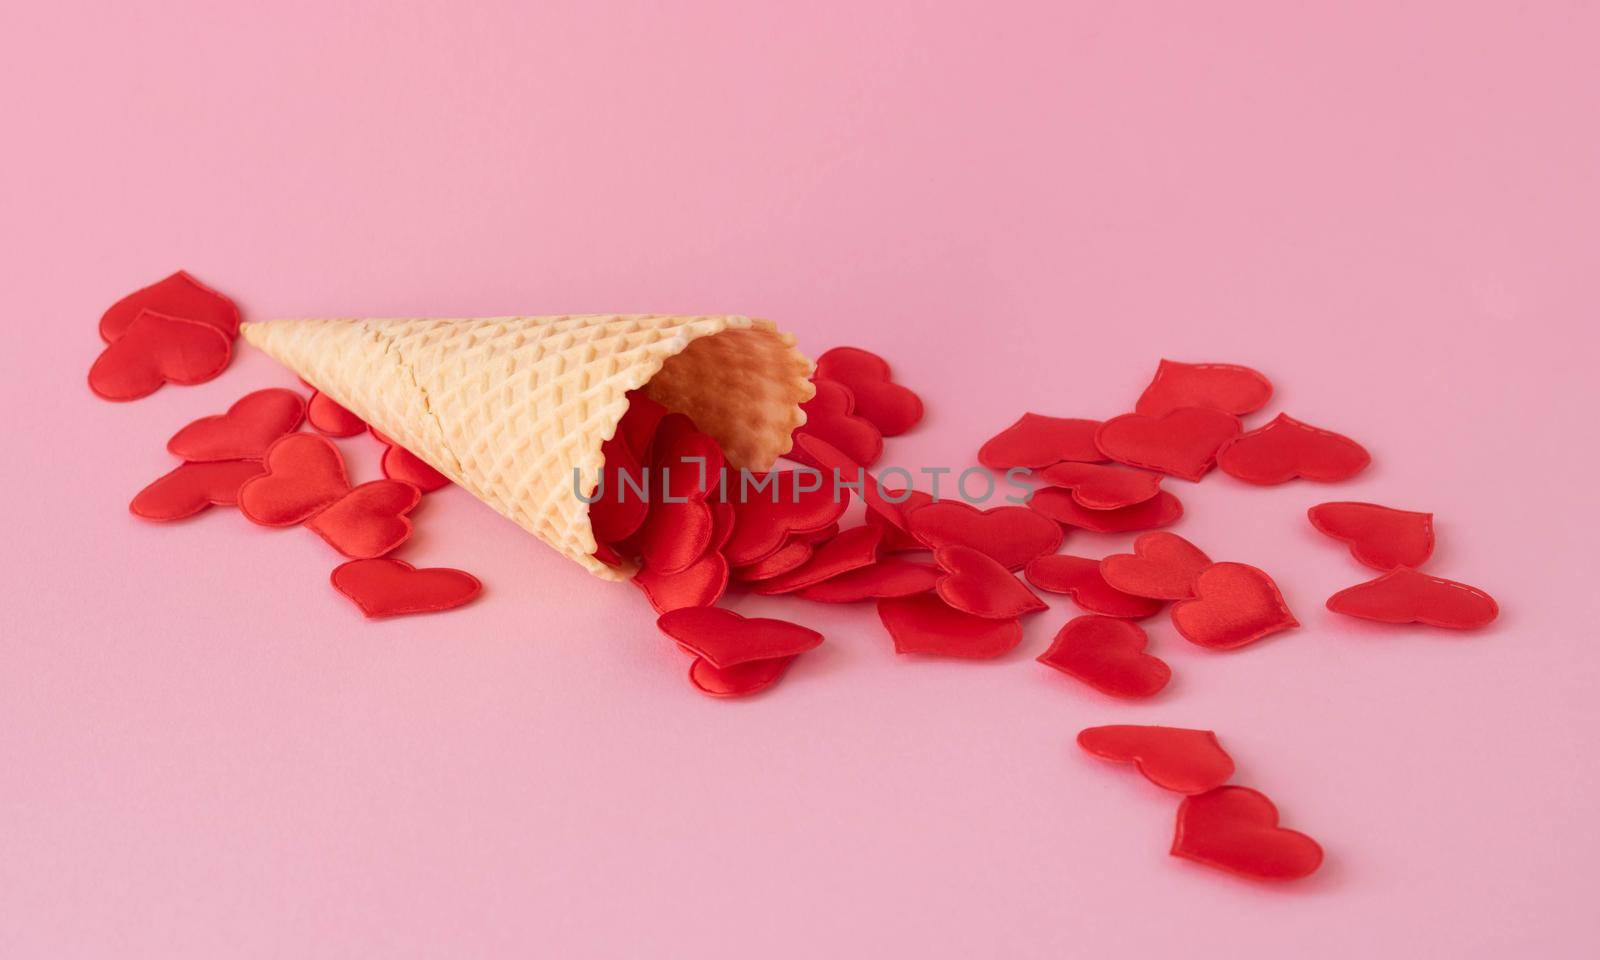 Creative photo of empty waffle cones with scattered red hearts on a pink background. The concept of love, summer, spring by lapushka62